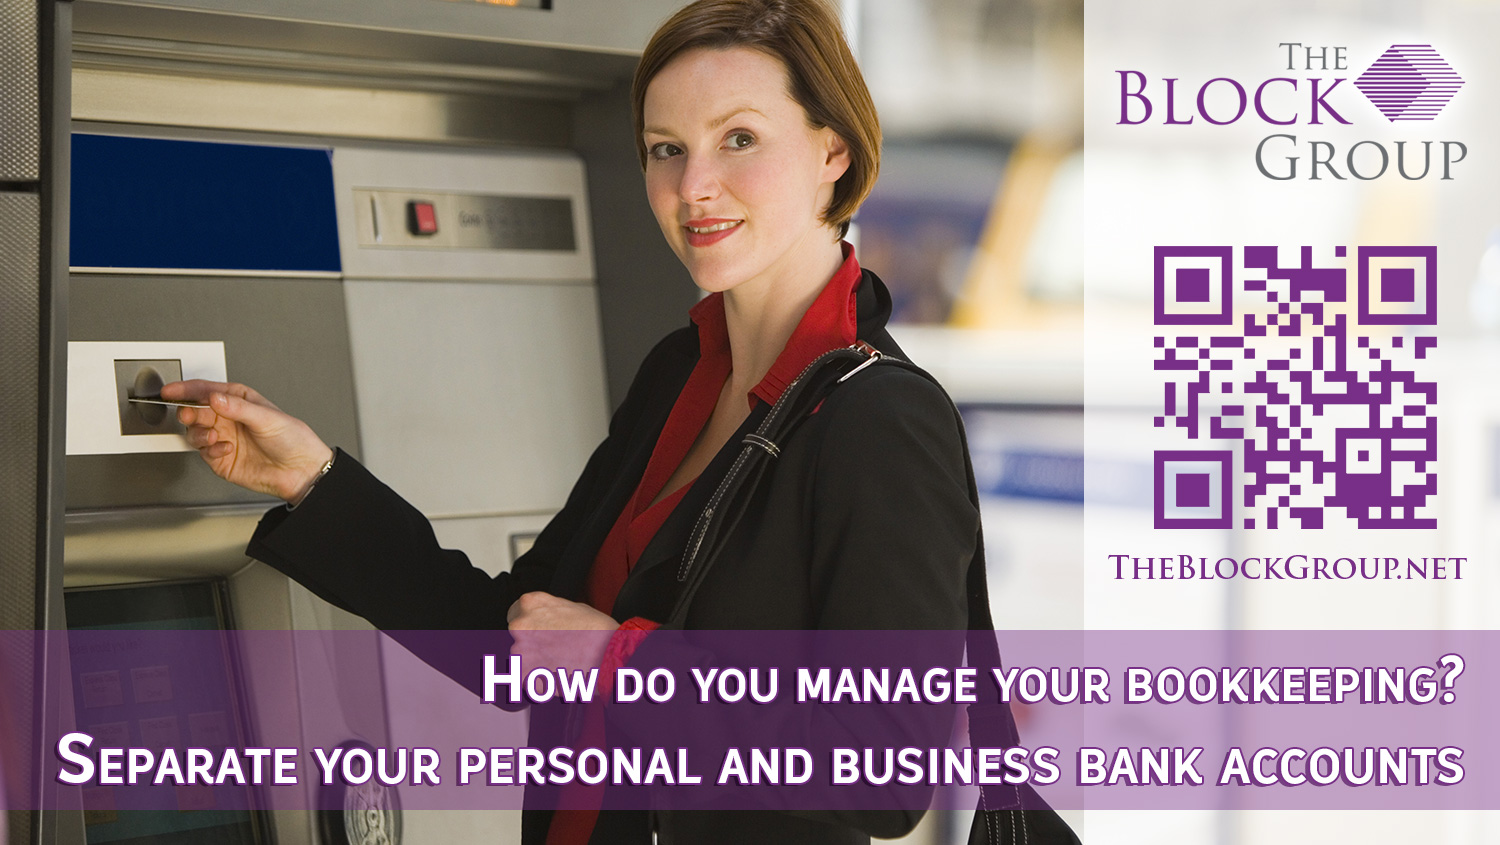 032-Separate-your-personal-and-business-bank-accounts